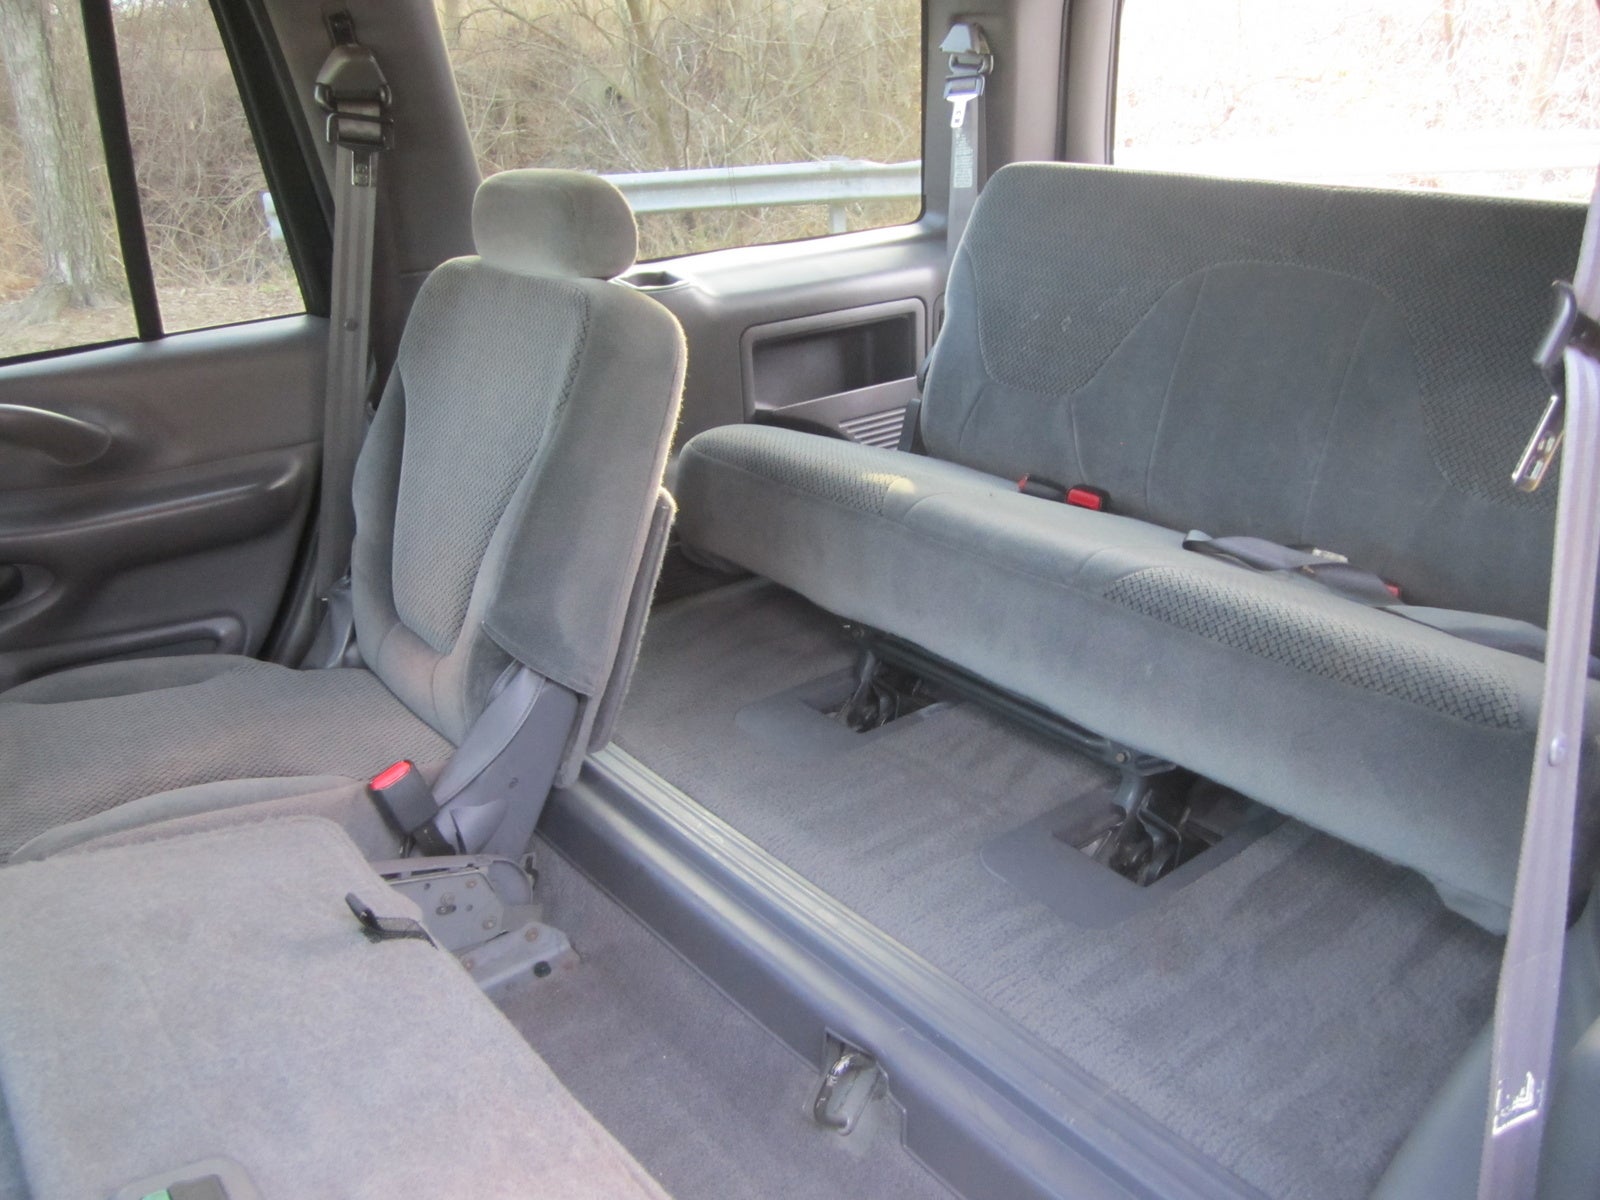 2000 Ford expedition xlt interior #4